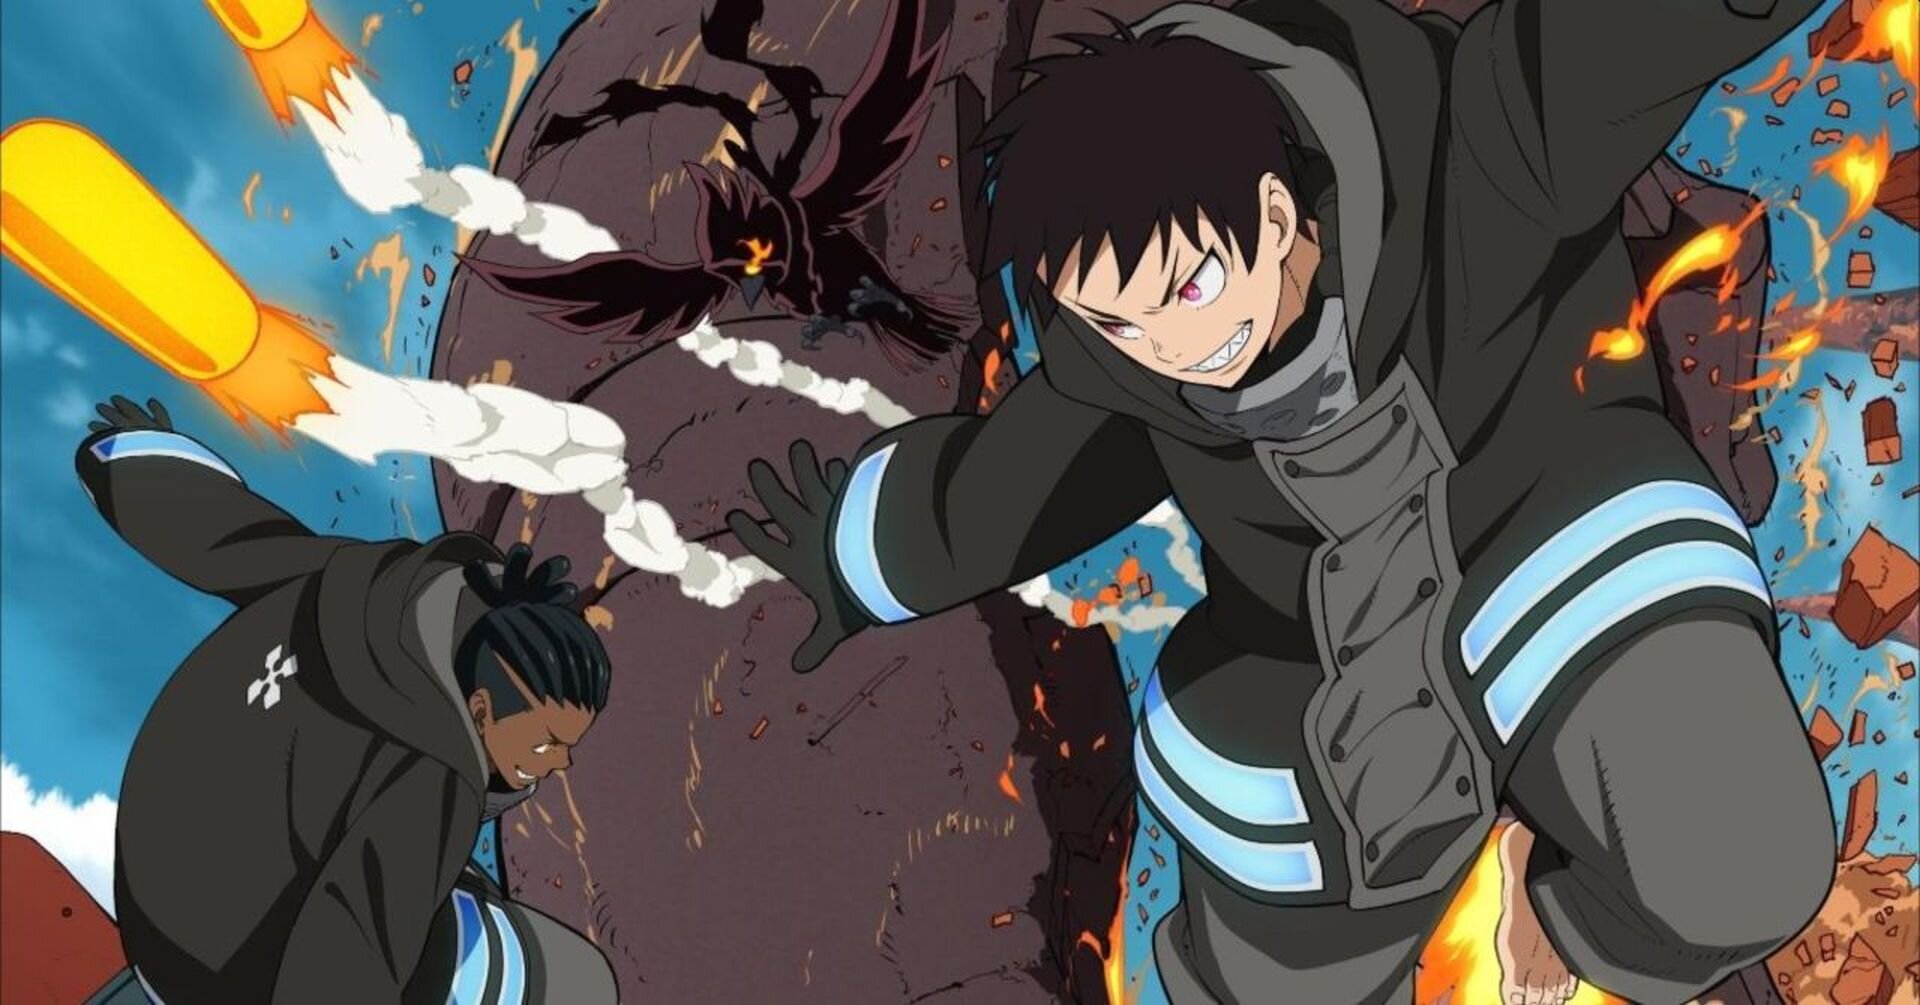 3 Reasons Why You Should Watch Fire Force - Anime Shelter